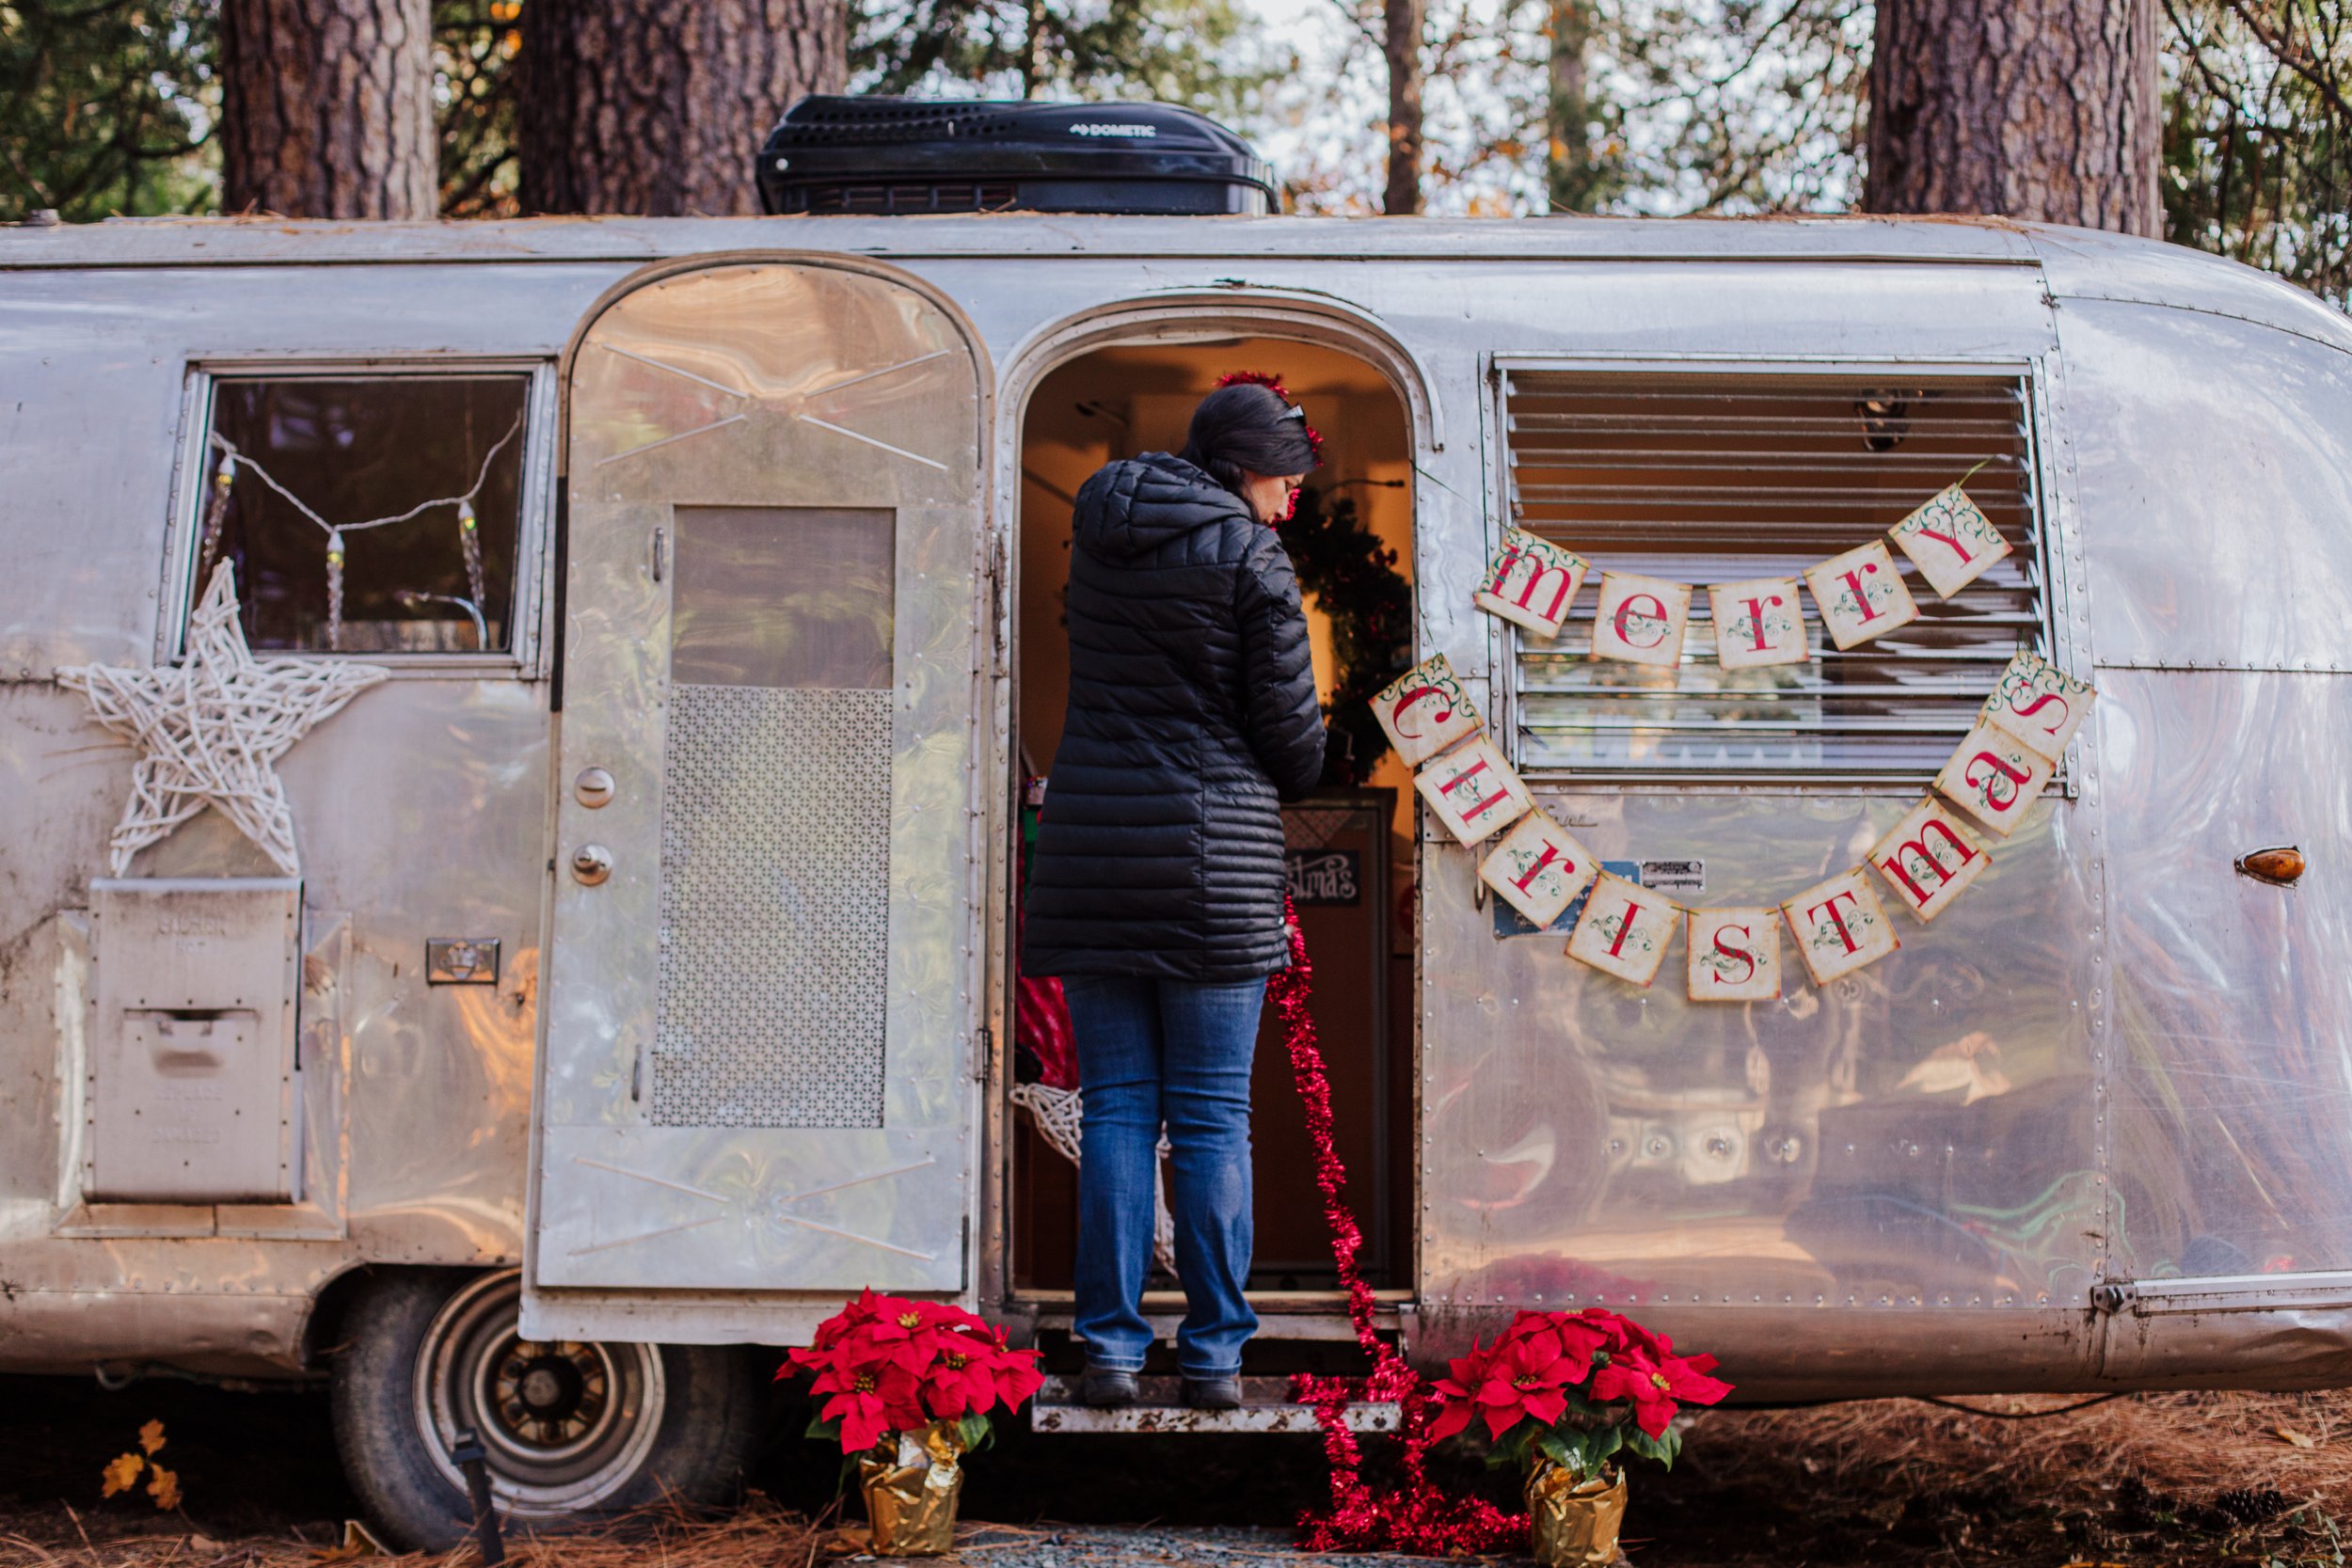 Lenkaland Photography at the Inn Town Campground in Nevada City, California